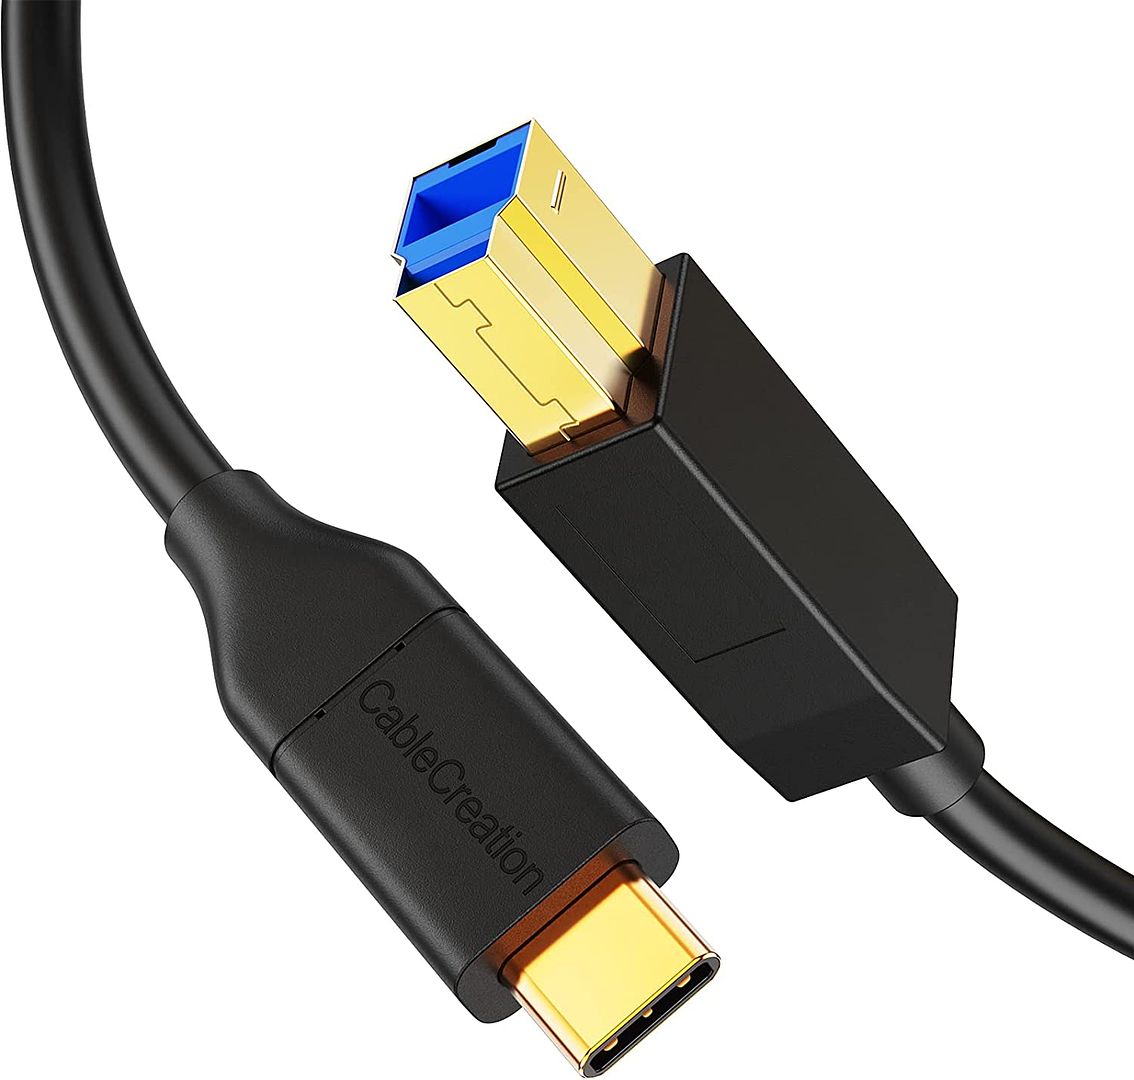 USB 3.1 C TO USB B CABLE 4'